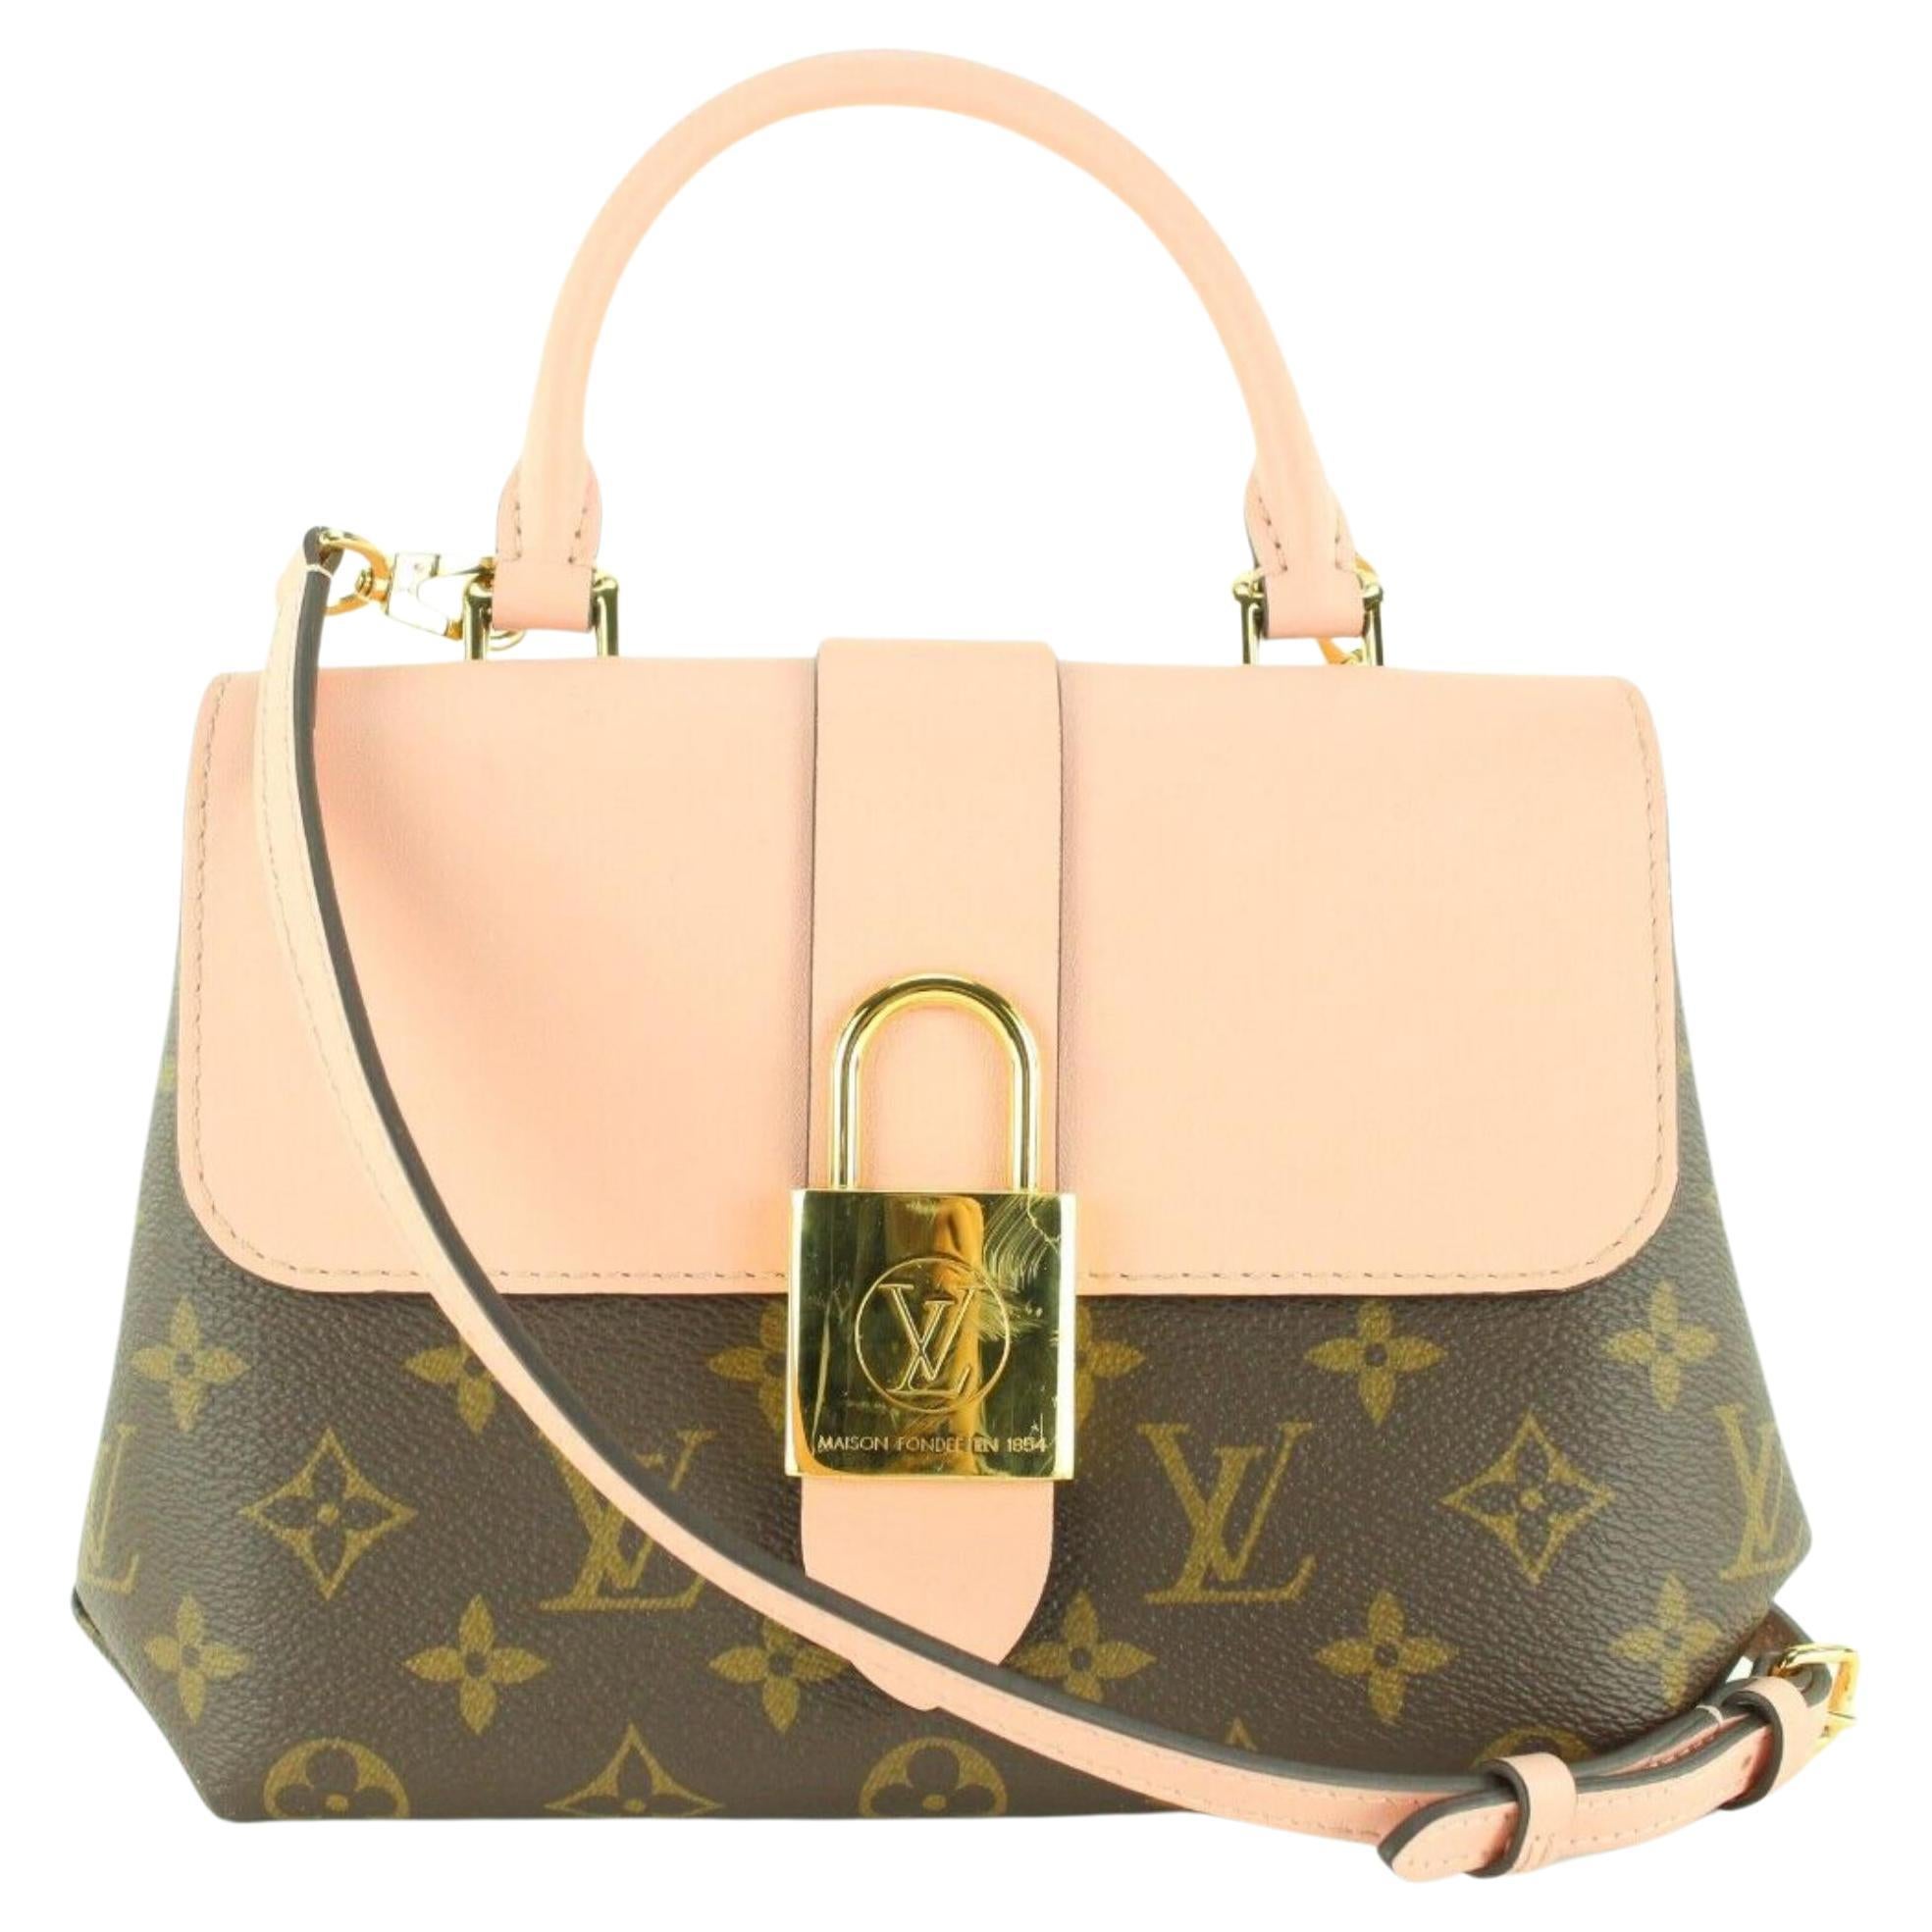 Yes, I need a better handbag! This Louis Vuitton Locky BB Rose